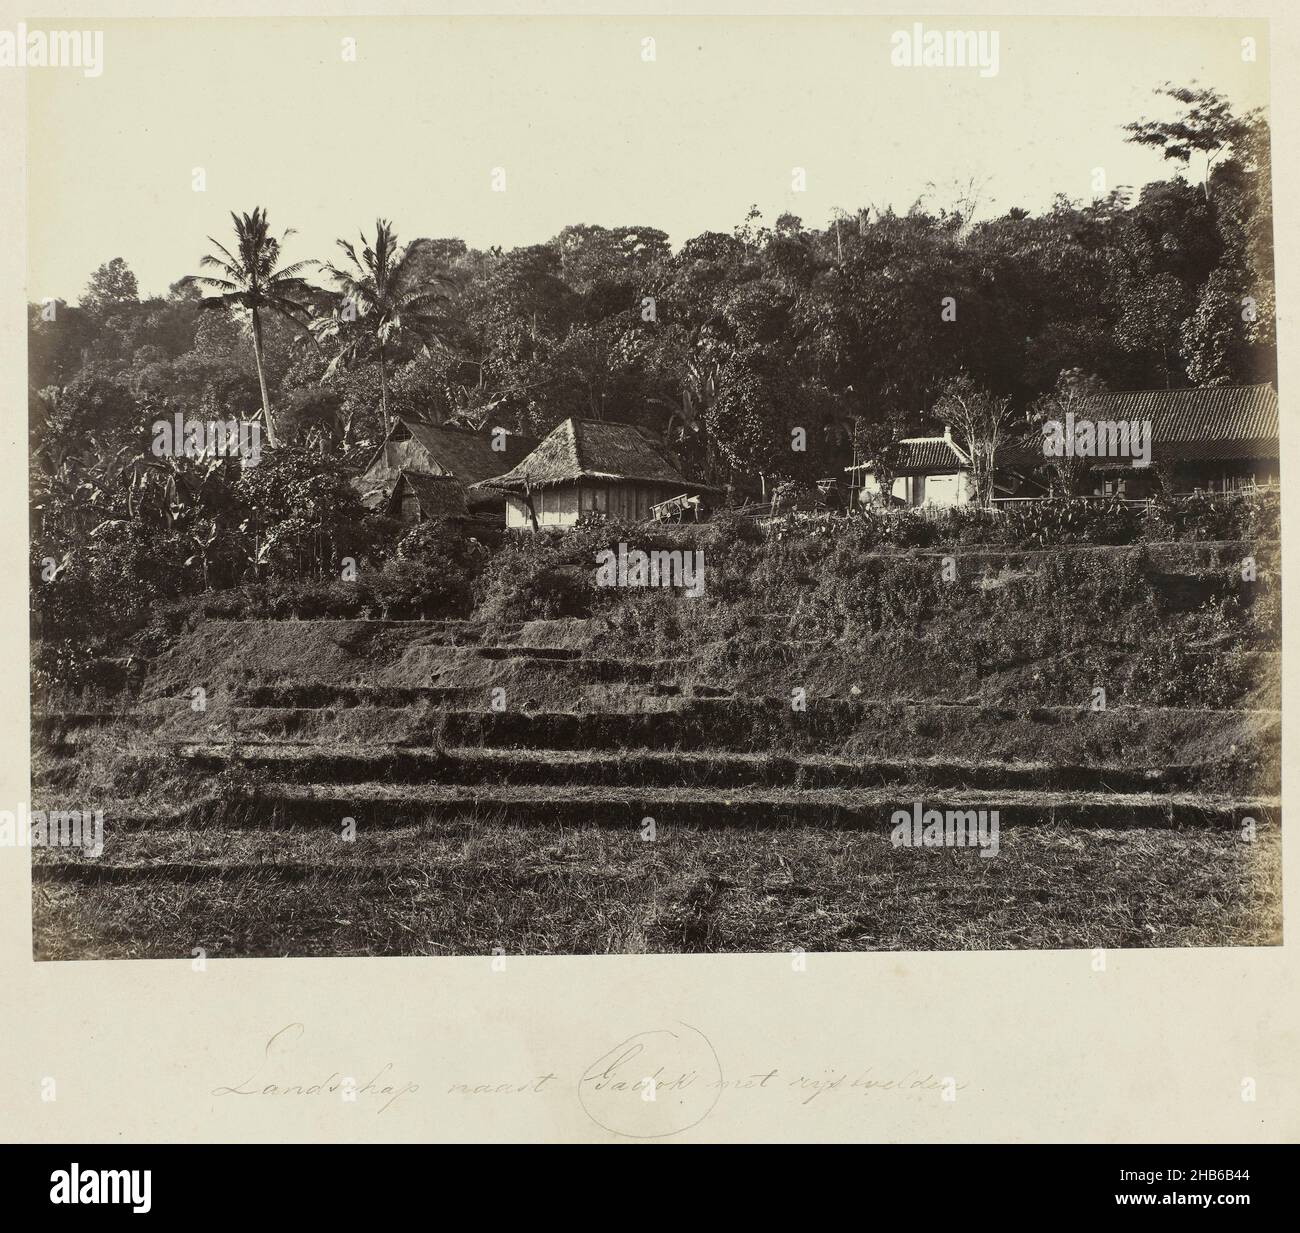 Landscape next to Gadok with rice fields (title on object), Sawa's near Gadog, in the vicinity of Buitenzorg. Part of the green photo album with photos of Java, in the possession of pharmacist Specht-Grijp, who returned from Batavia to the Netherlands in 1865., Woodbury & Page, Buitenzorg, 1863 - 1869, photographic support, albumen print, height 203 mm × width 271 mm Stock Photo